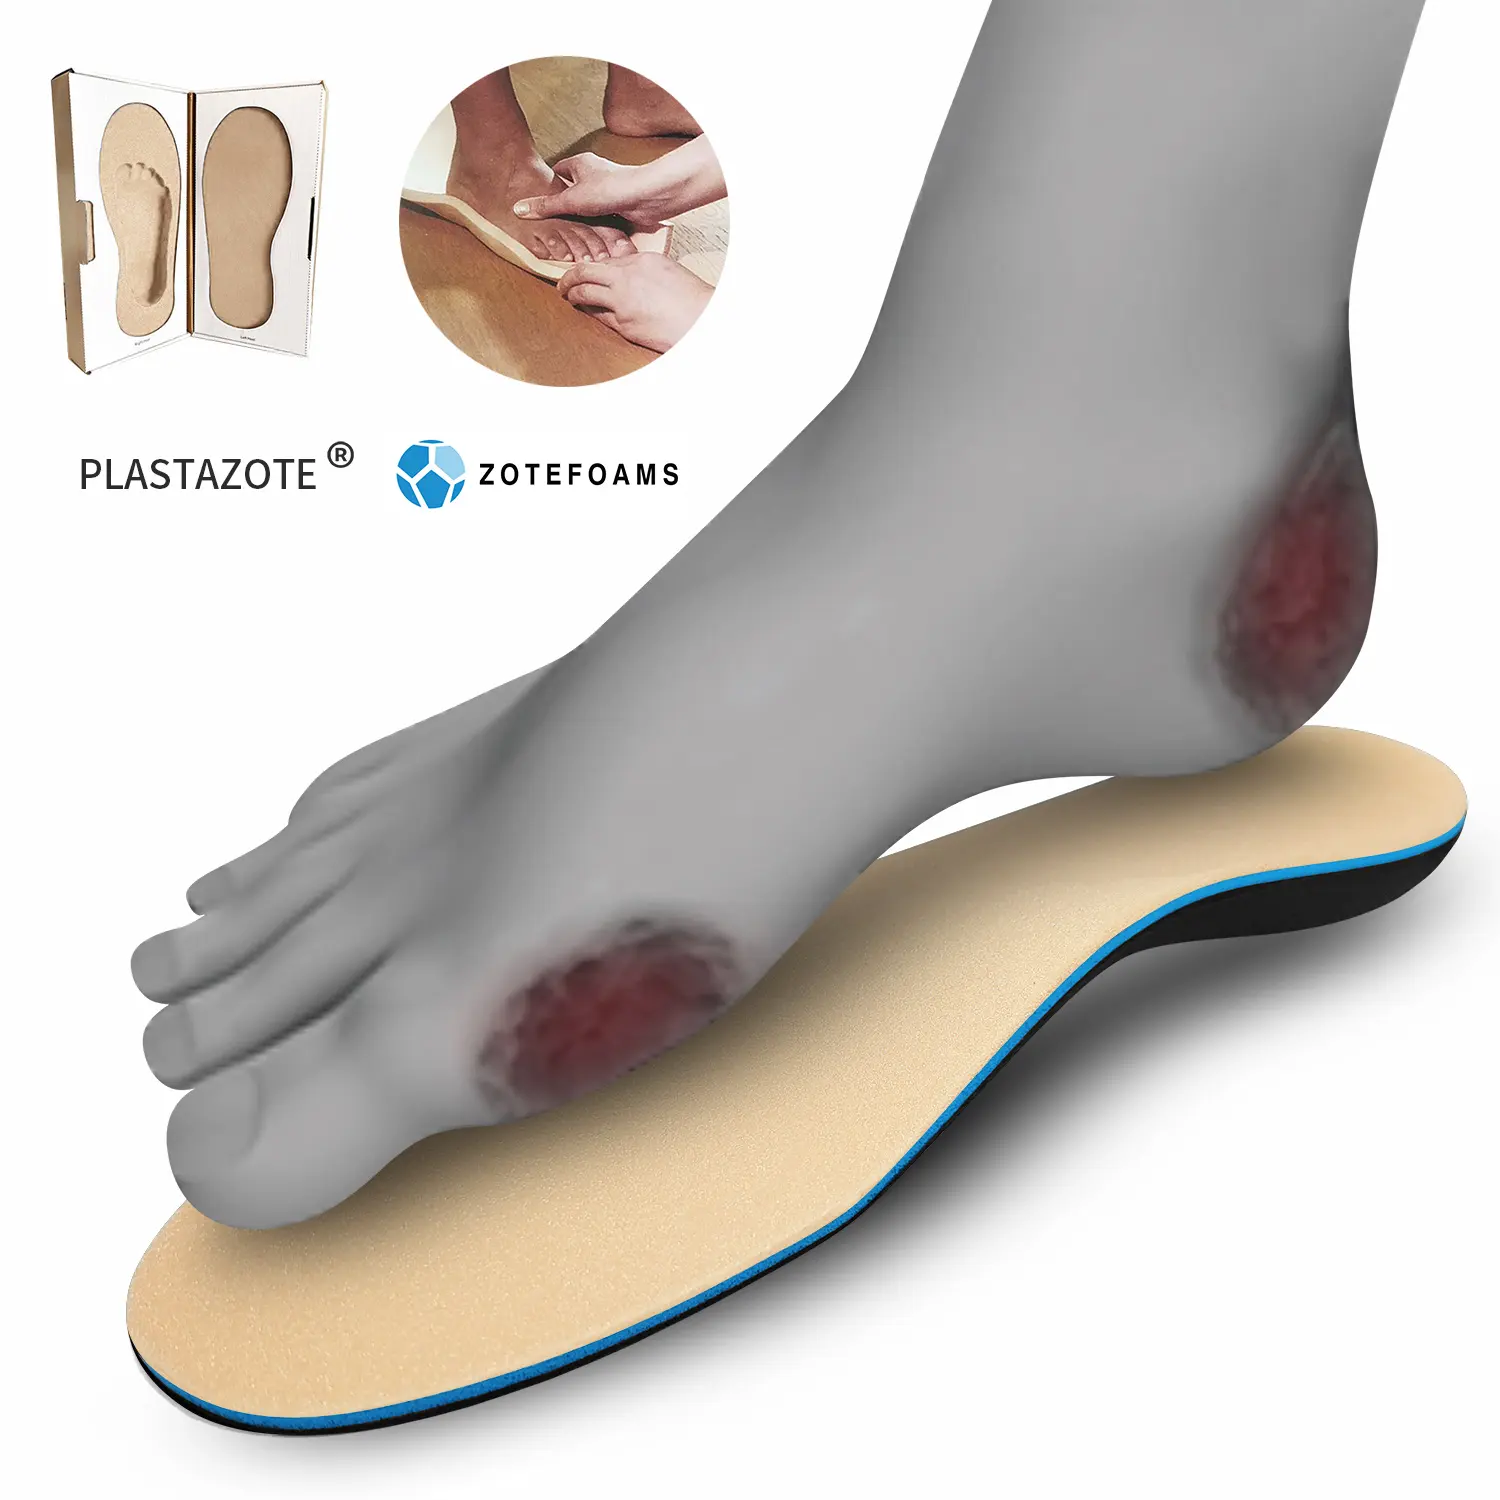 Arch Support Orthopedic Medical Shoe Insole Therapeutic Inserts Plastazote Diabetes Foot Insoles